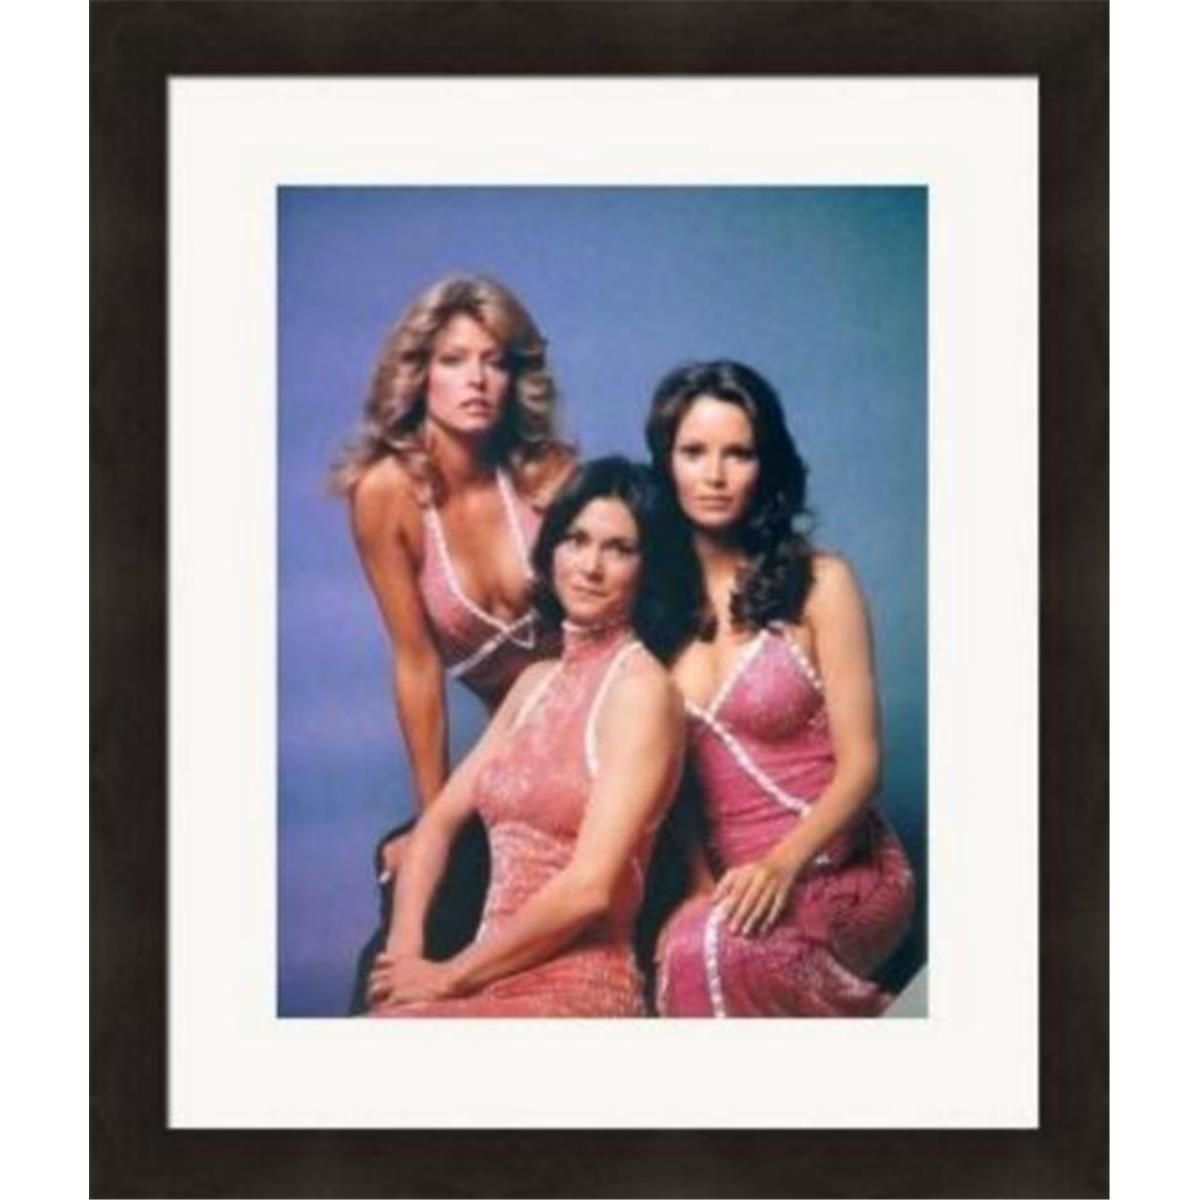 377423 8 x 10 in. Jaclyn Smith Autographed - SC3 Matted & Framed Photo -  Autograph Warehouse